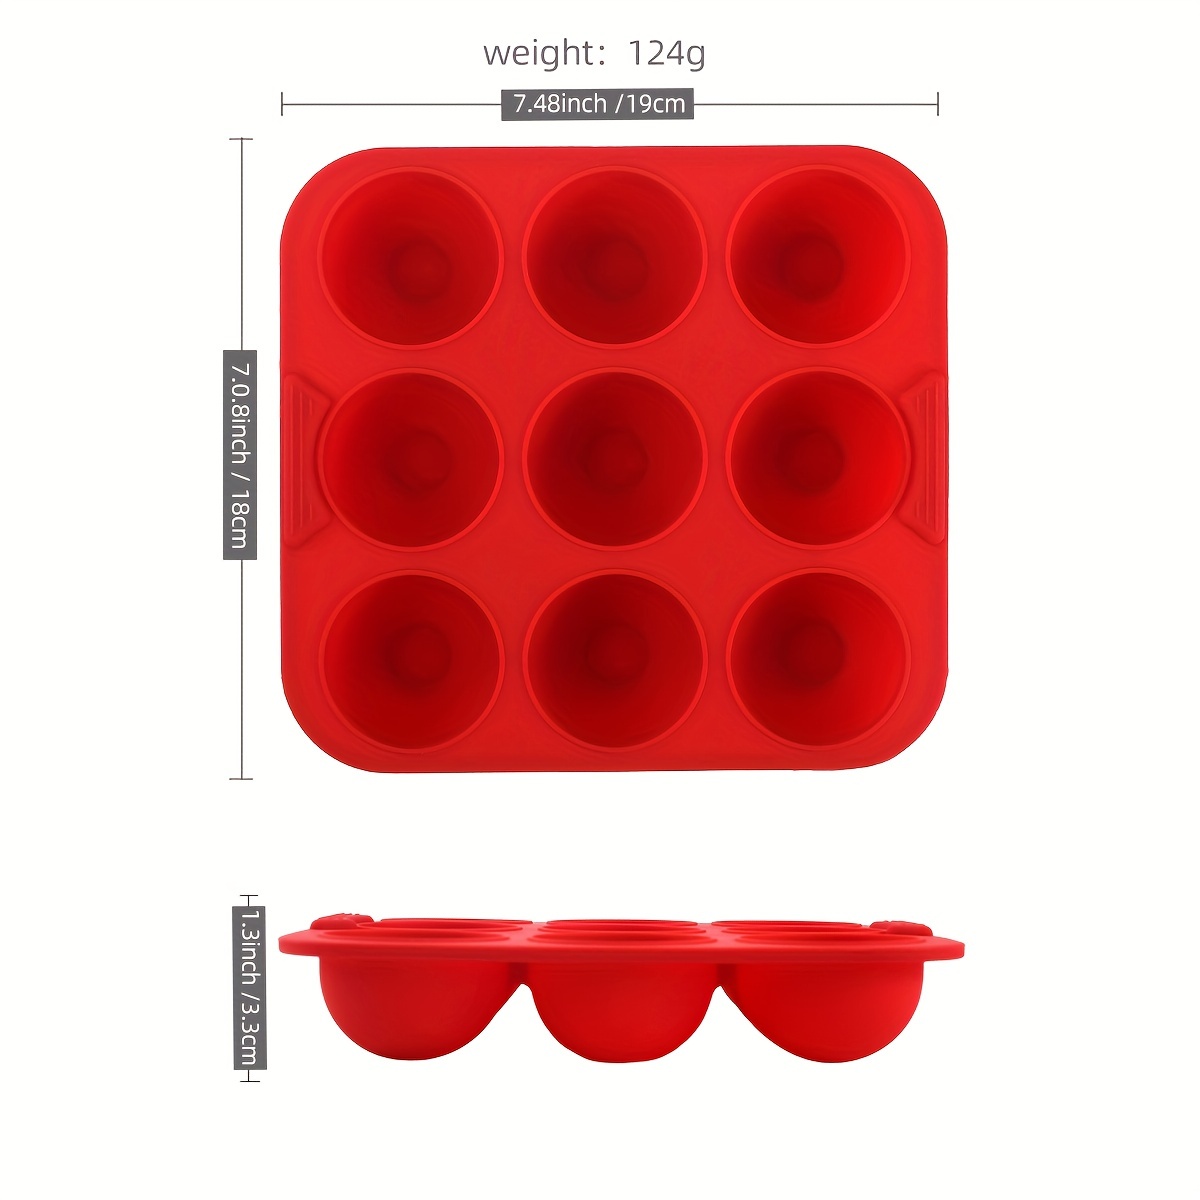 gia'sKITCHEN Silicone 7-Cavity Egg Bites Mold with Lid, Red, 21572